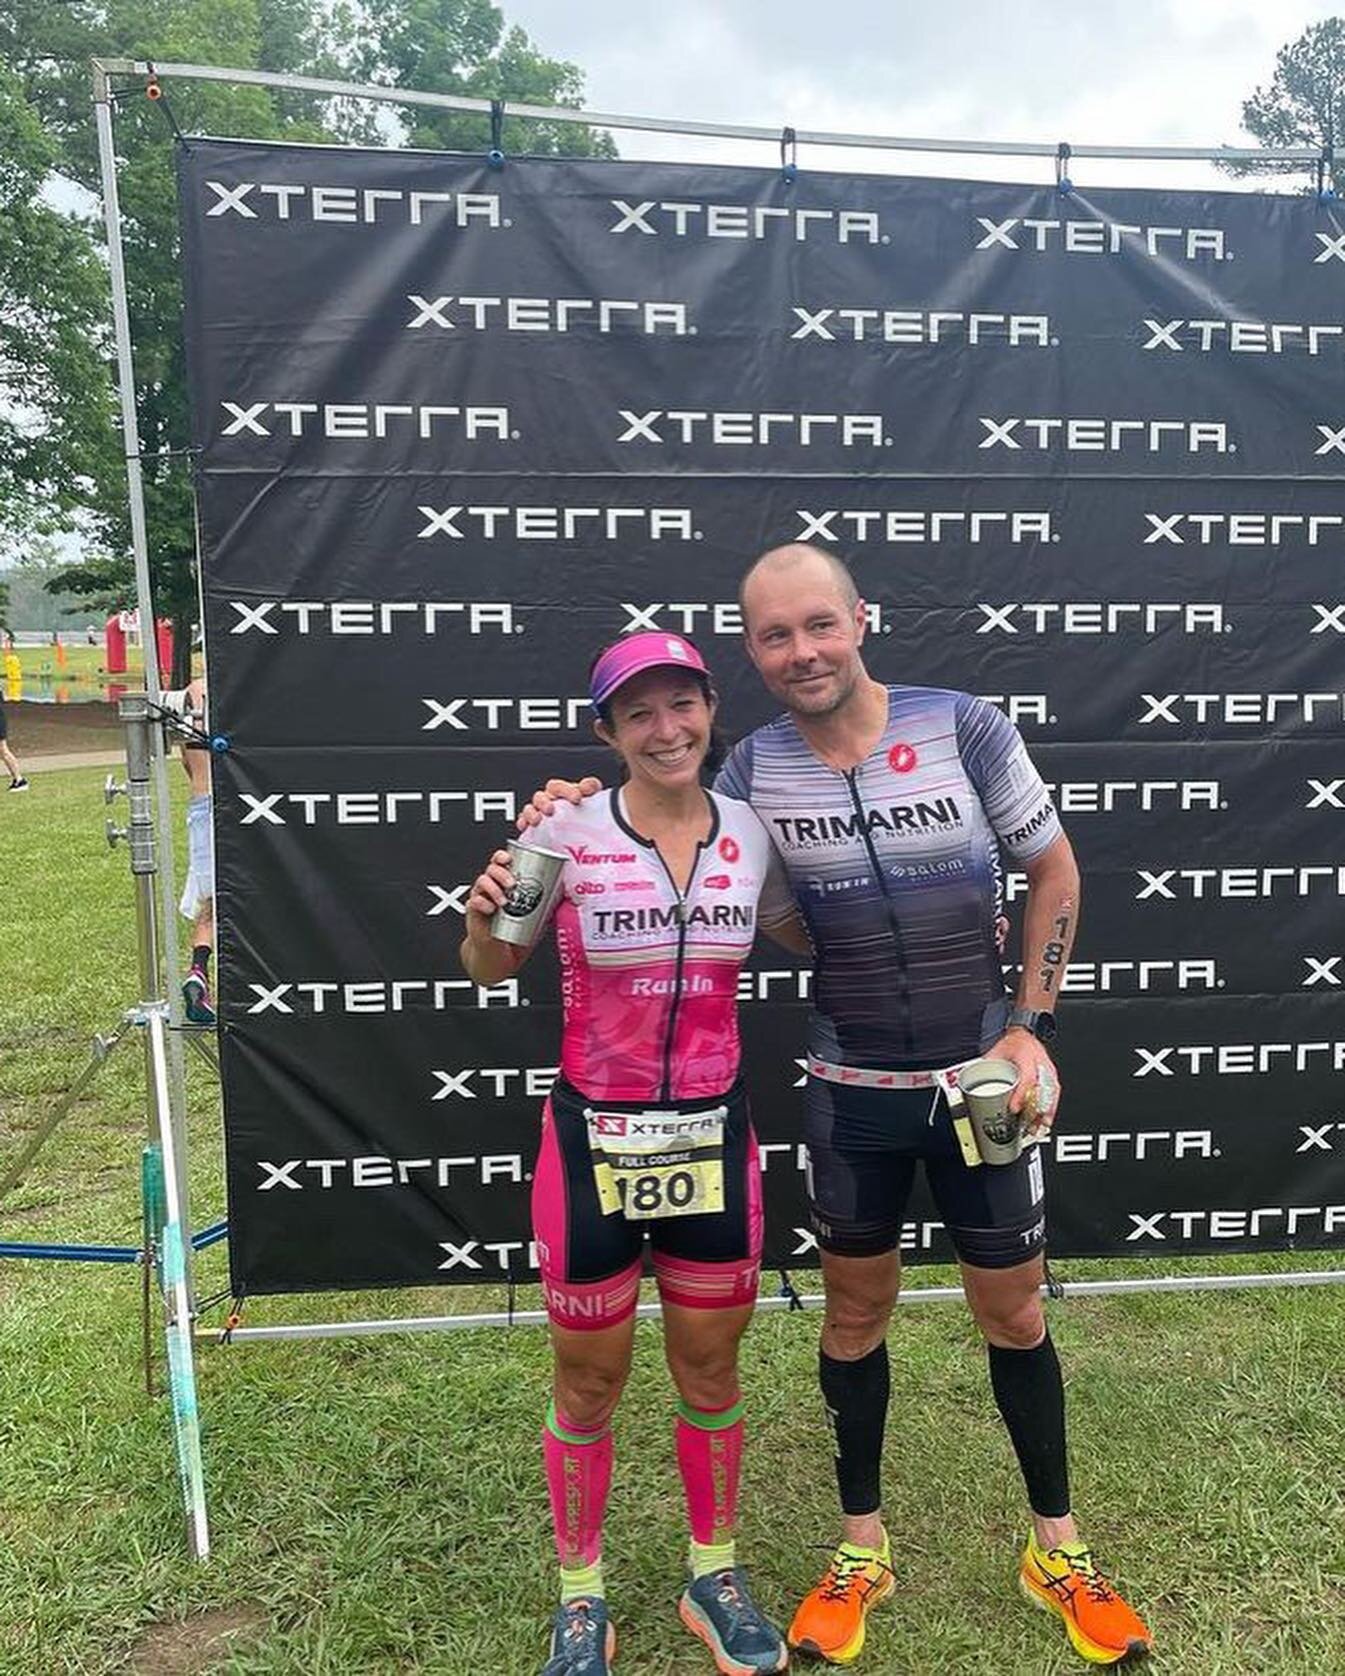 Two years ago Karel did his first Xterra triathlon at Oak Mountain. Not only did he excel but he had so much fun taking triathlon off road. 

I wanted to experience his joy of mountain biking so in November of 2021, Karel started to teach me how to r